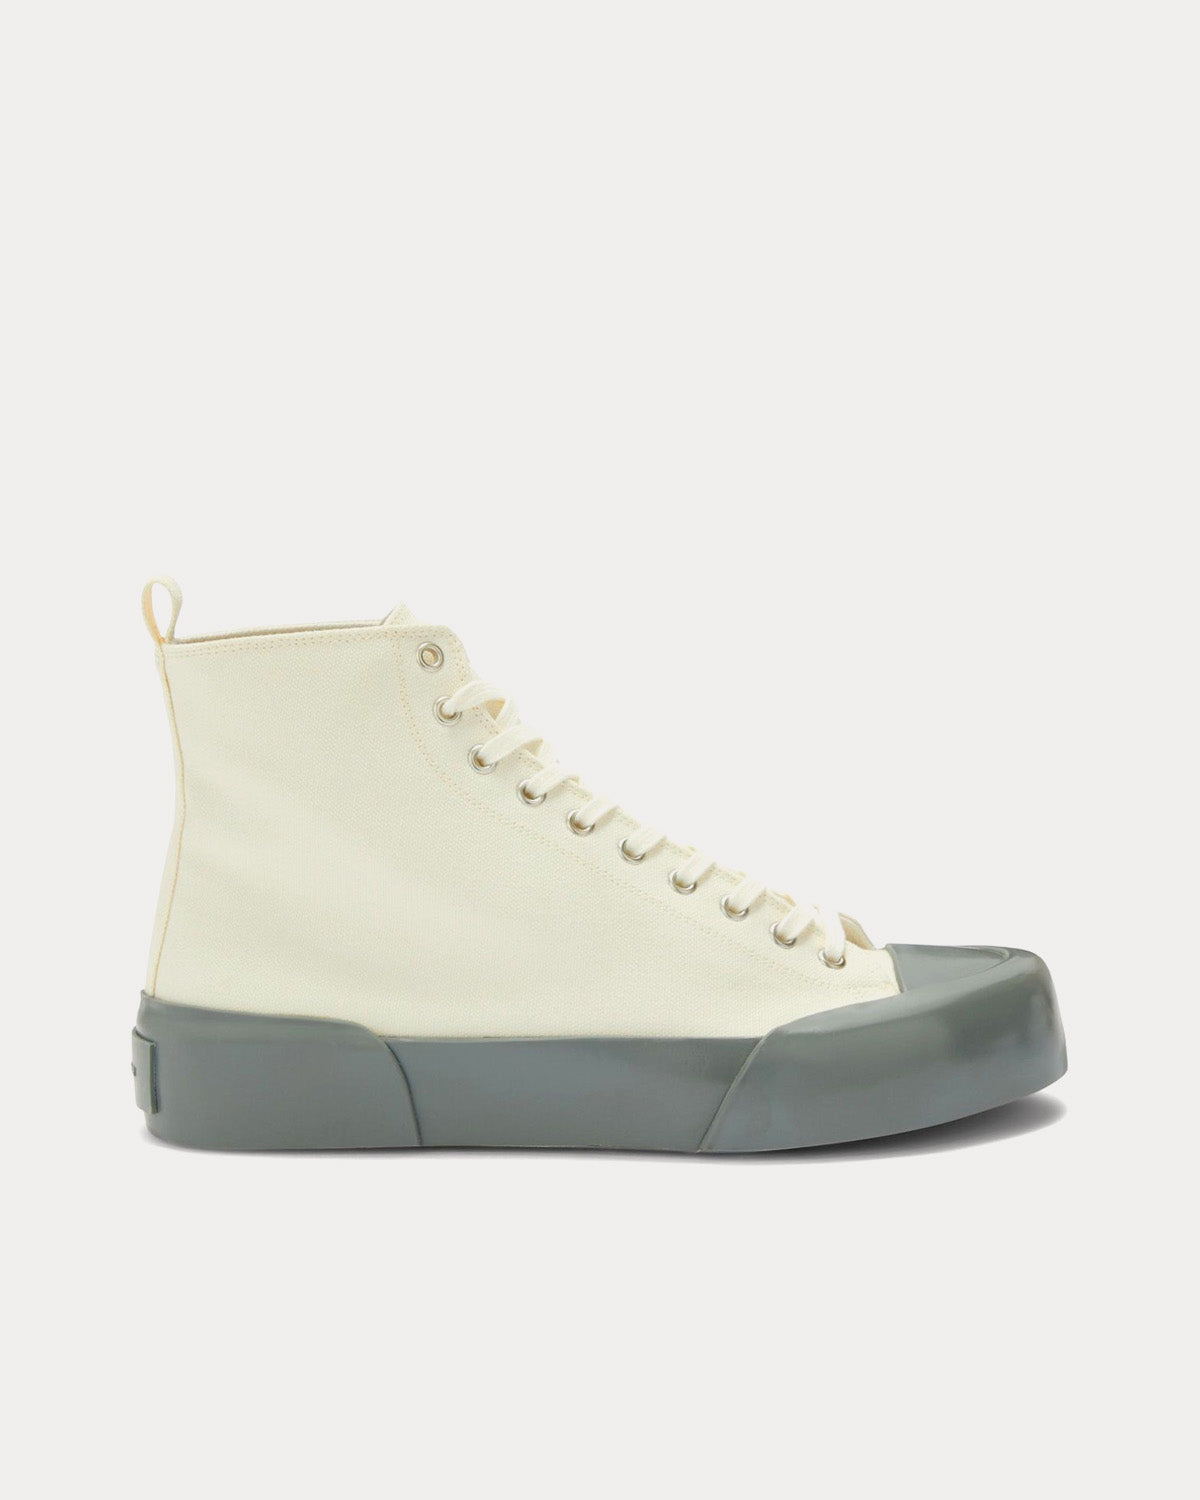 Vulcanised Rubber & Canvas White / Grey High Top Sneakers